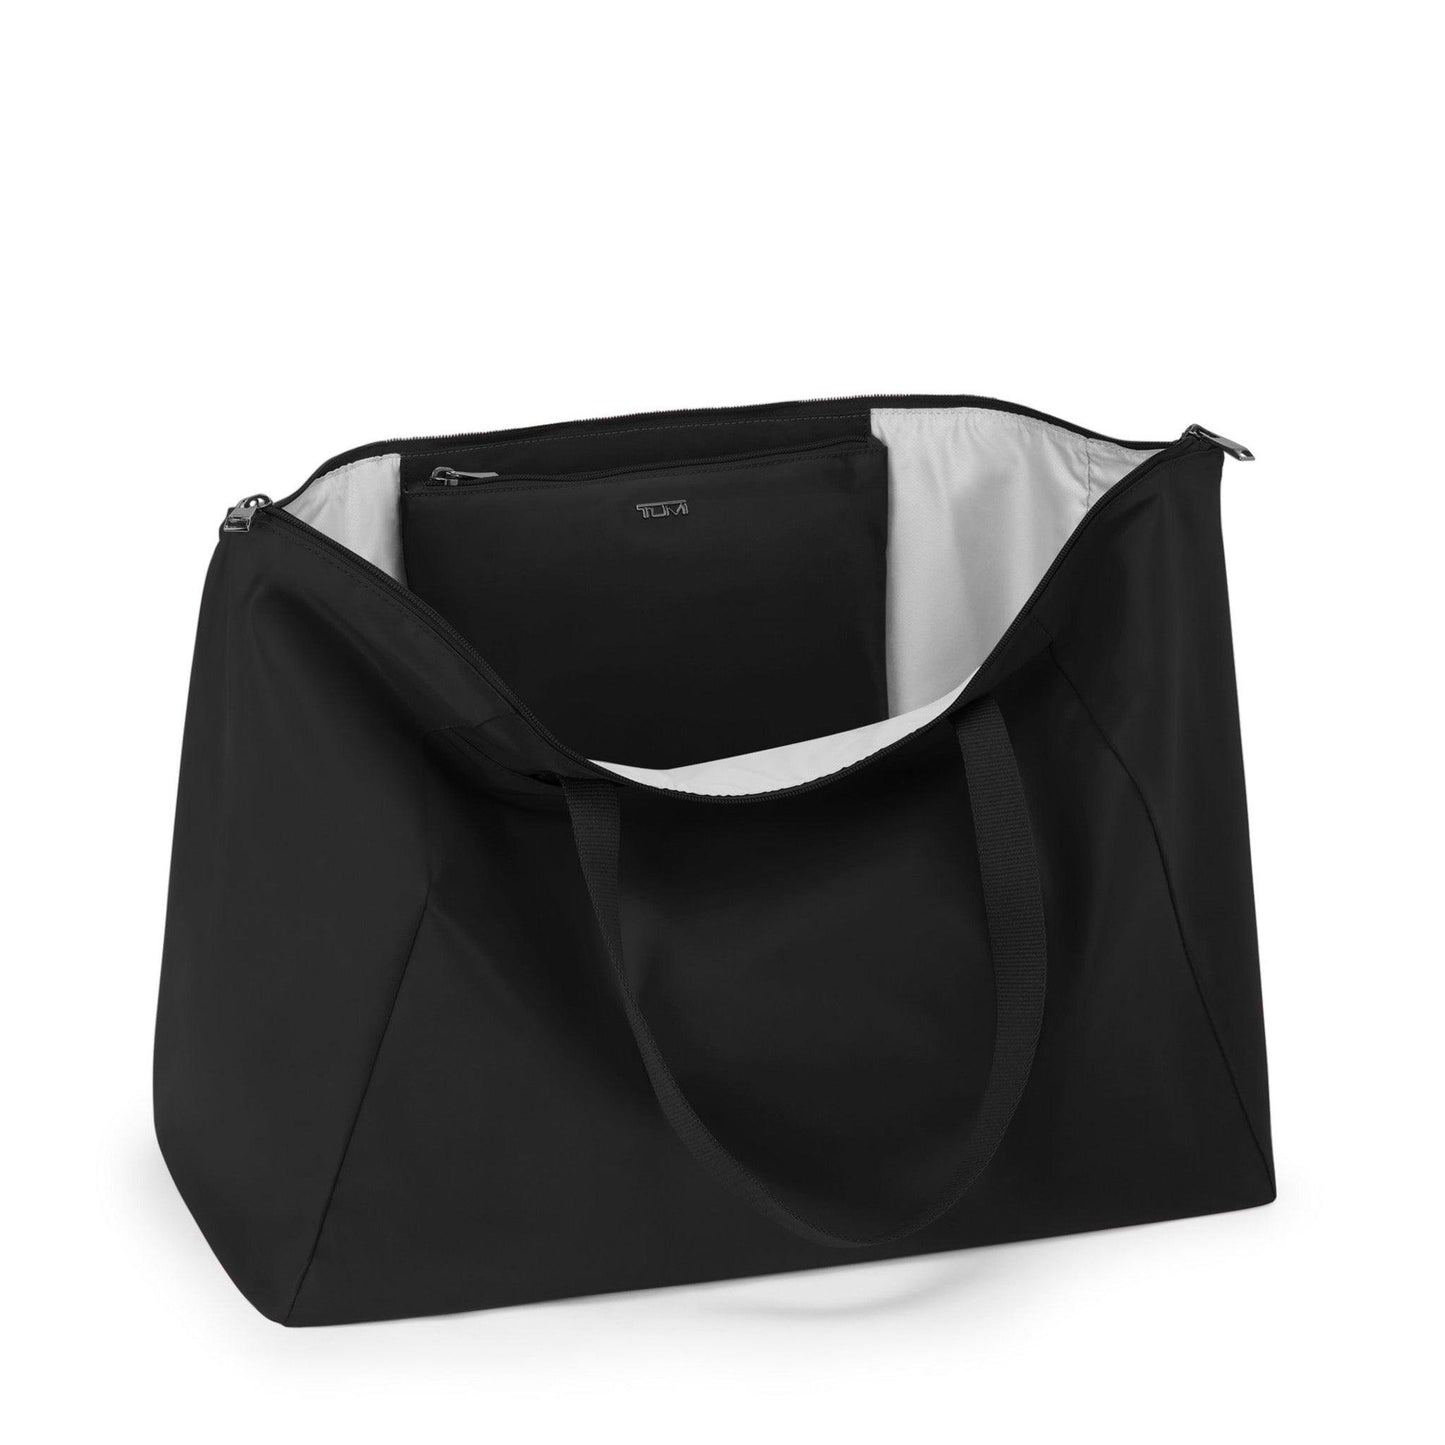 Just In Case® Tote - Black/Gunmetal - Cosmos Boutique New Jersey